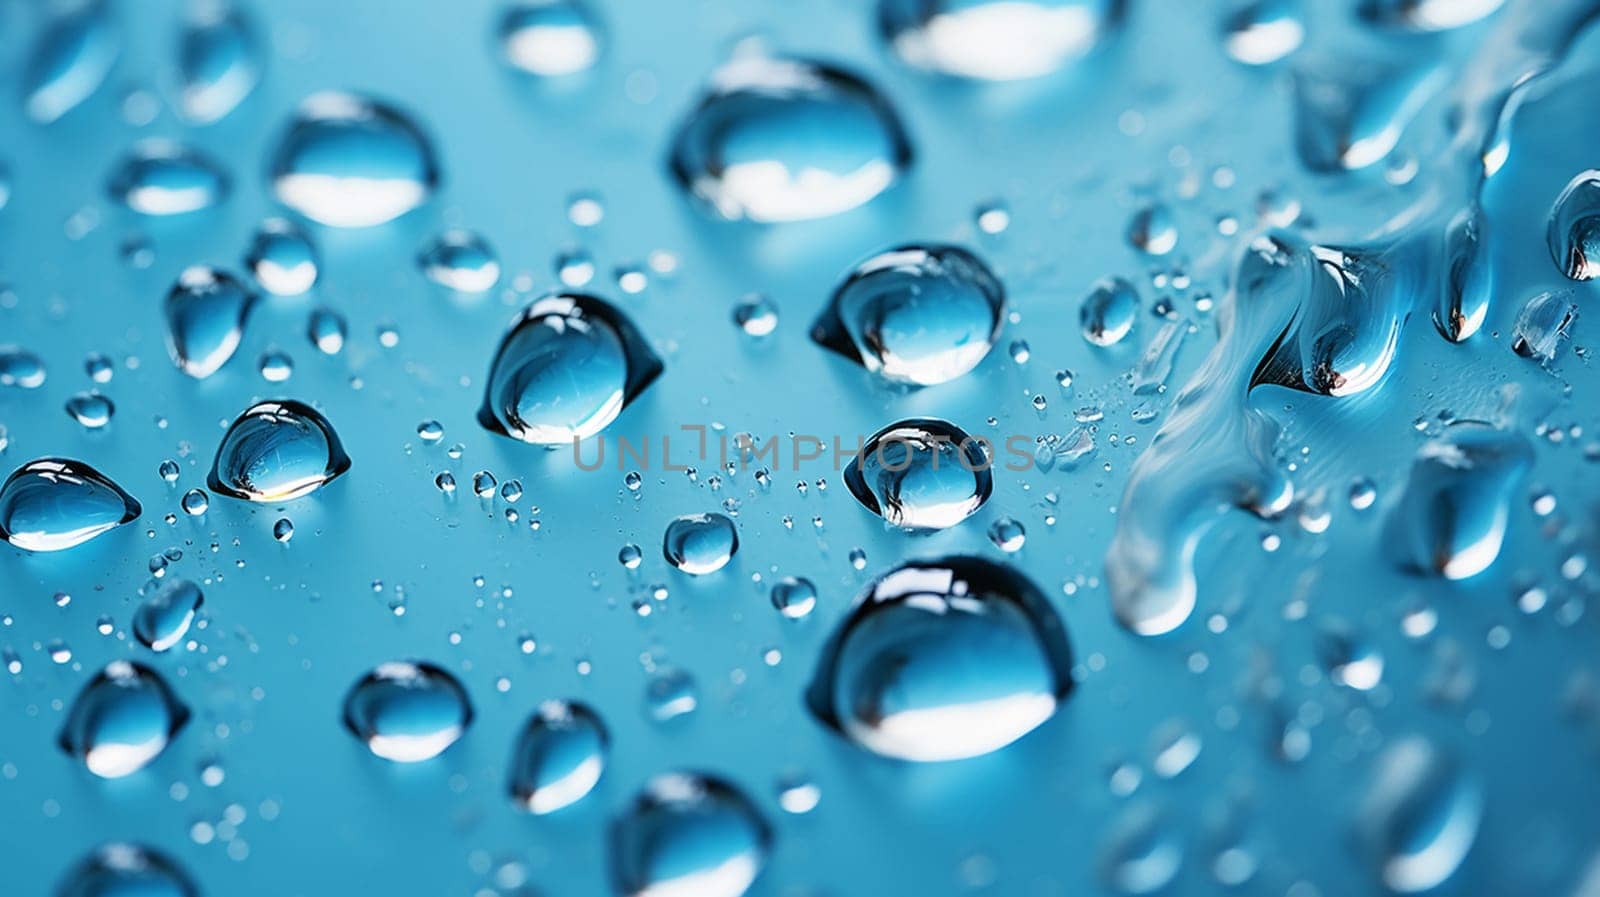 Drops of water on a blue background. Shallow depth of field, Generate AI  by Mrsongrphc